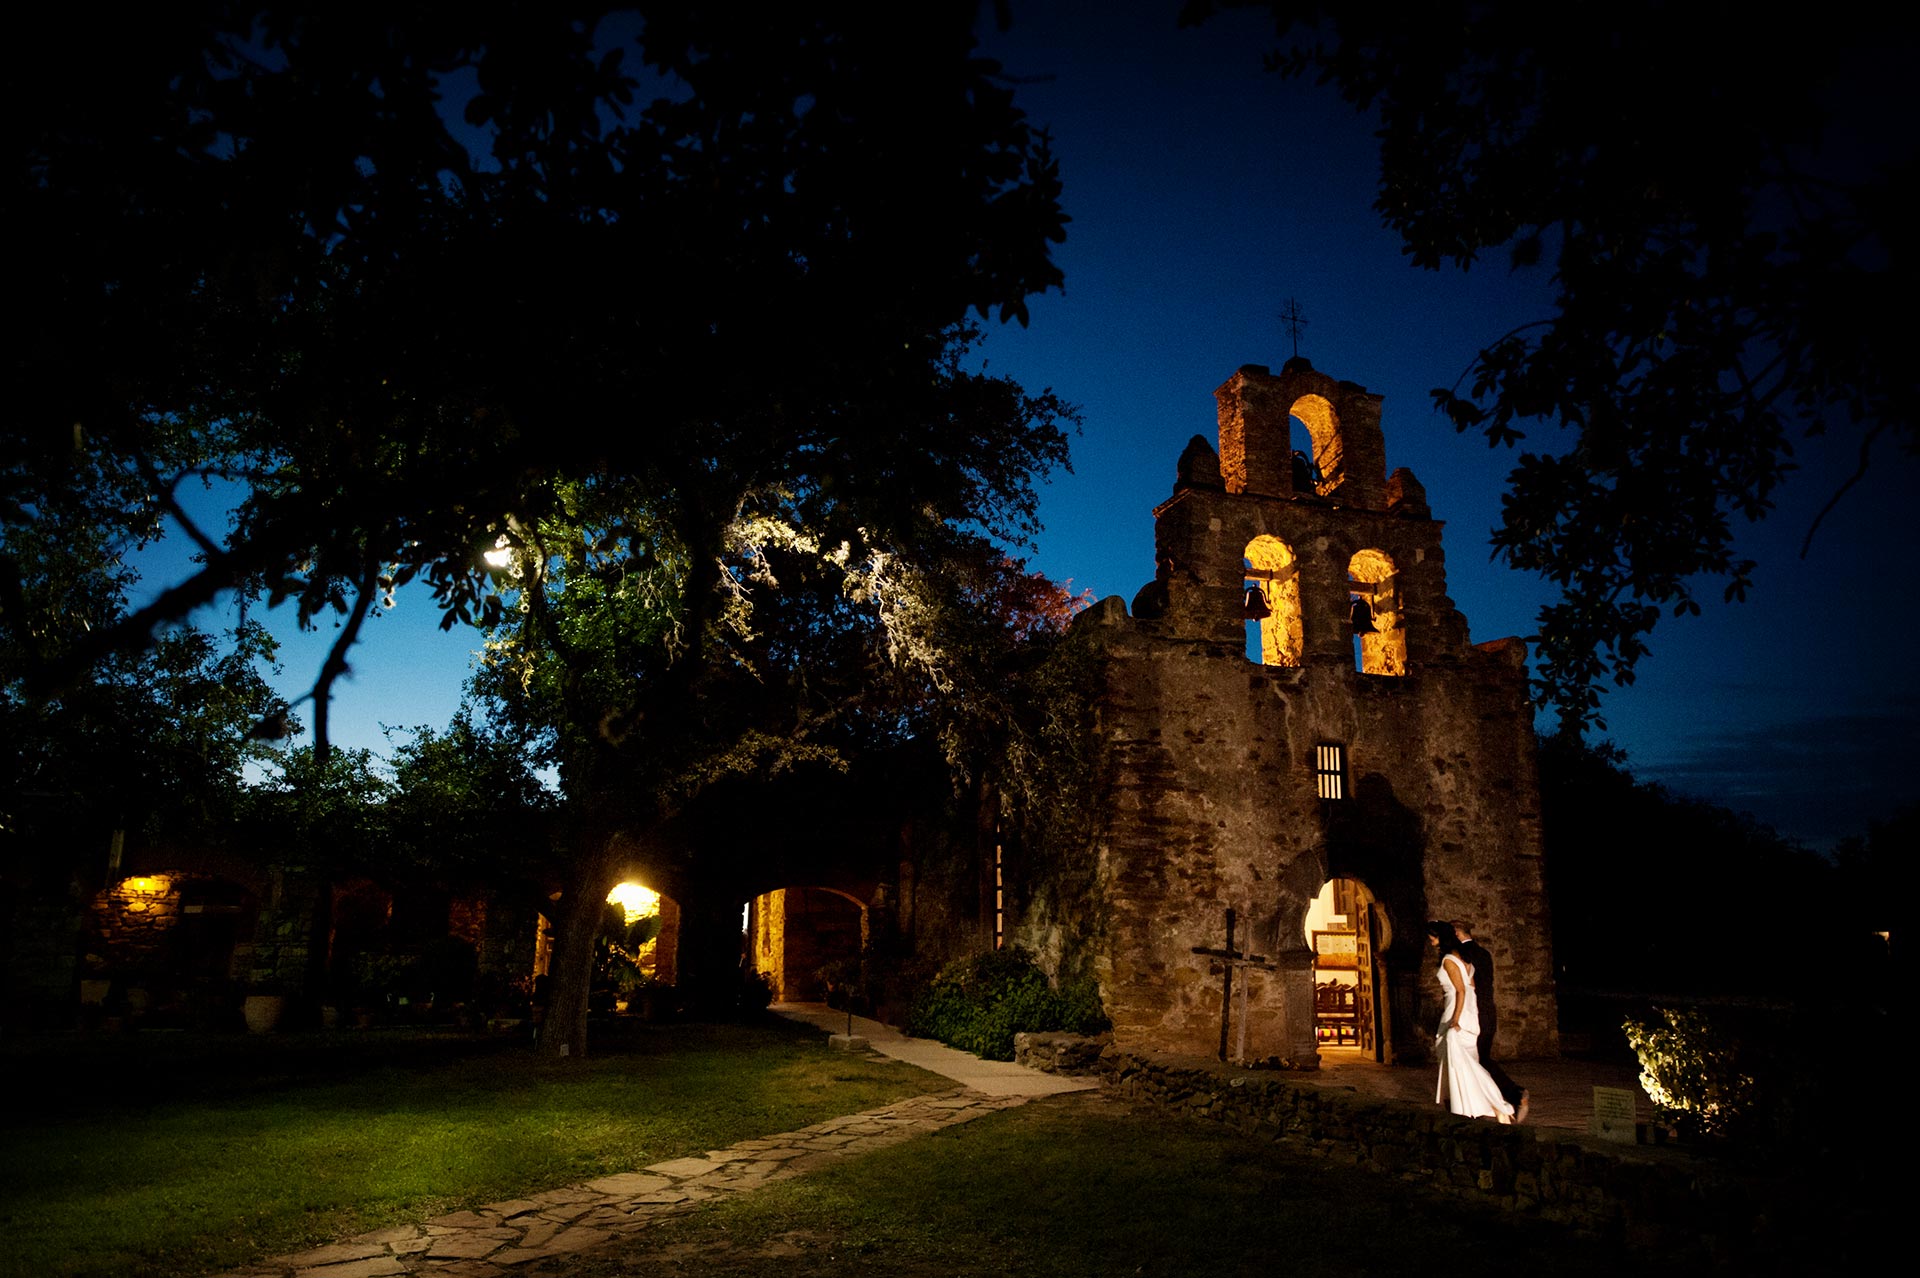 Bride and groom arrive at Mission Espada, San Antonio, Texas for their wedding. Photograph by Philip Thomas Photography.